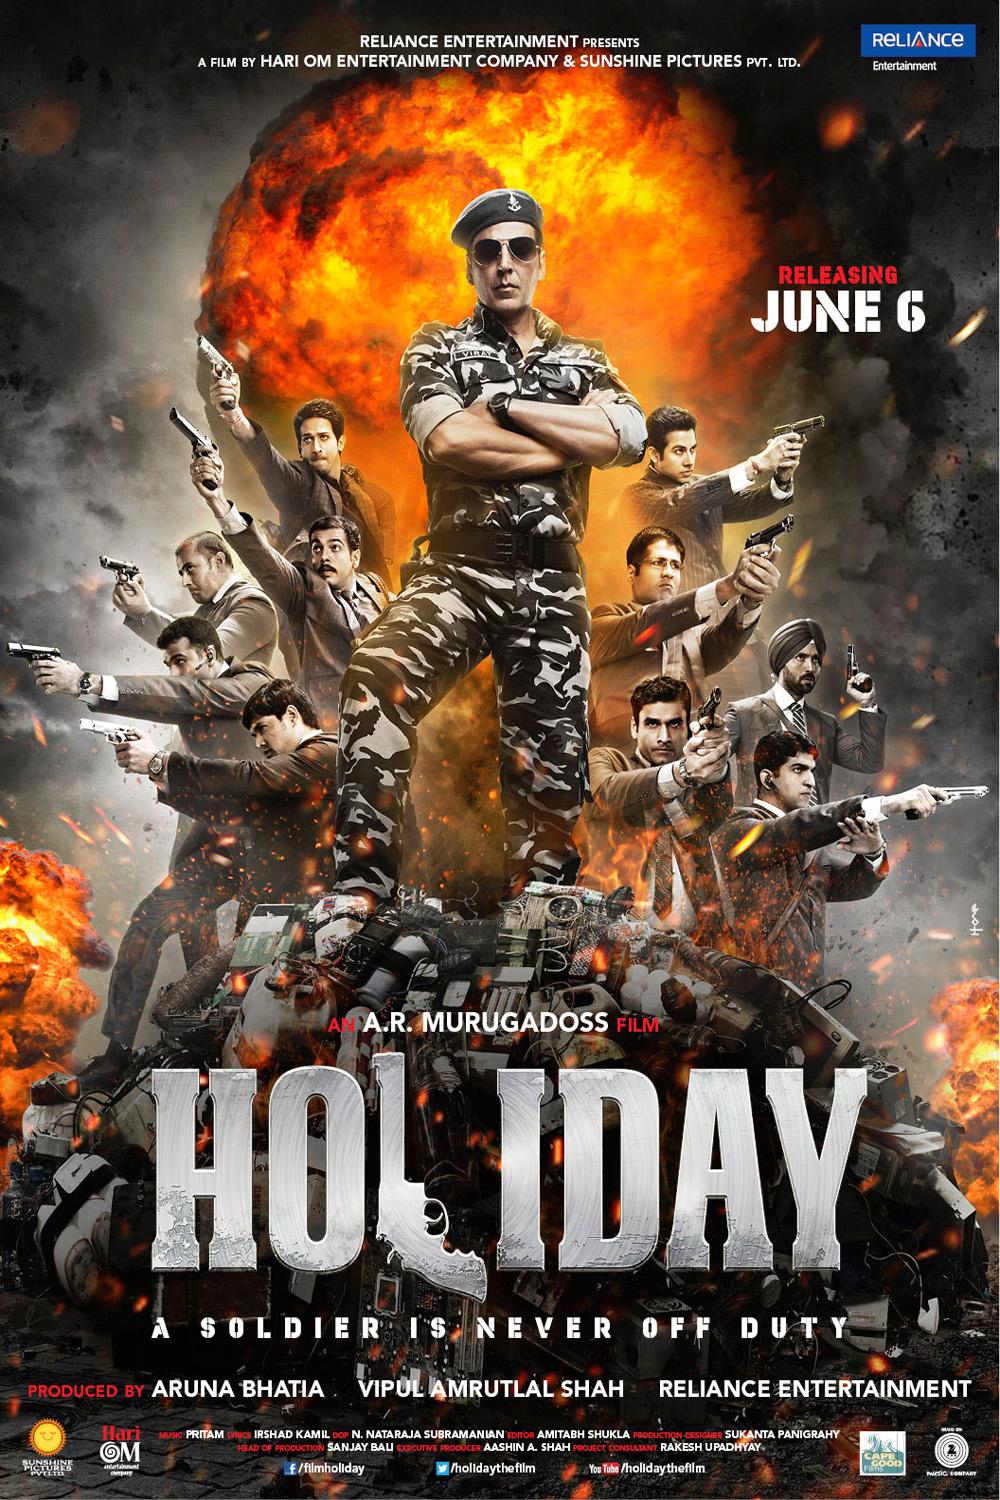 Holiday: Akshay Kumar as Virat won several hearts as he looked rather dashing in an army man’s uniform. The actor portrayed the story of an army man saving the city from a series of bomb blasts with utmost perfection